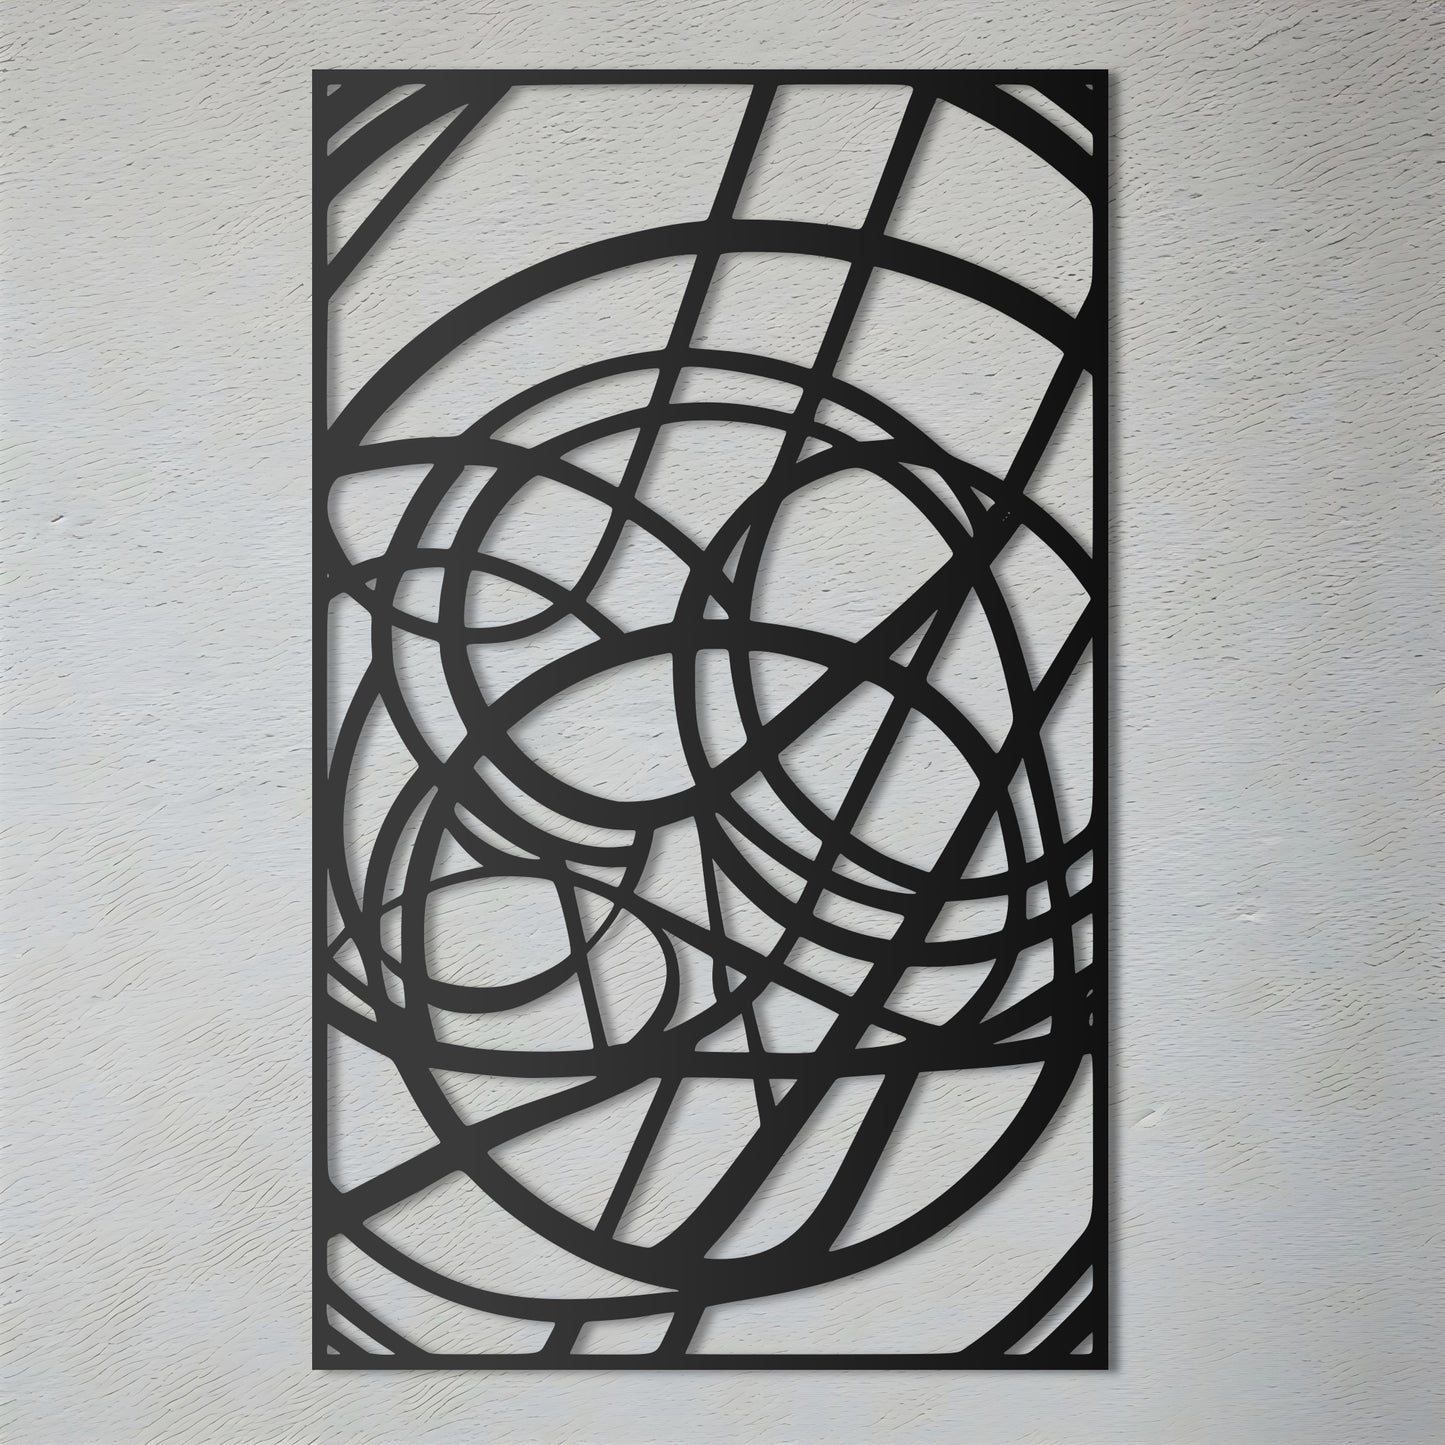 Minimalist Metal Wall Art - Abstract Drawing Inspired by Brice Marden